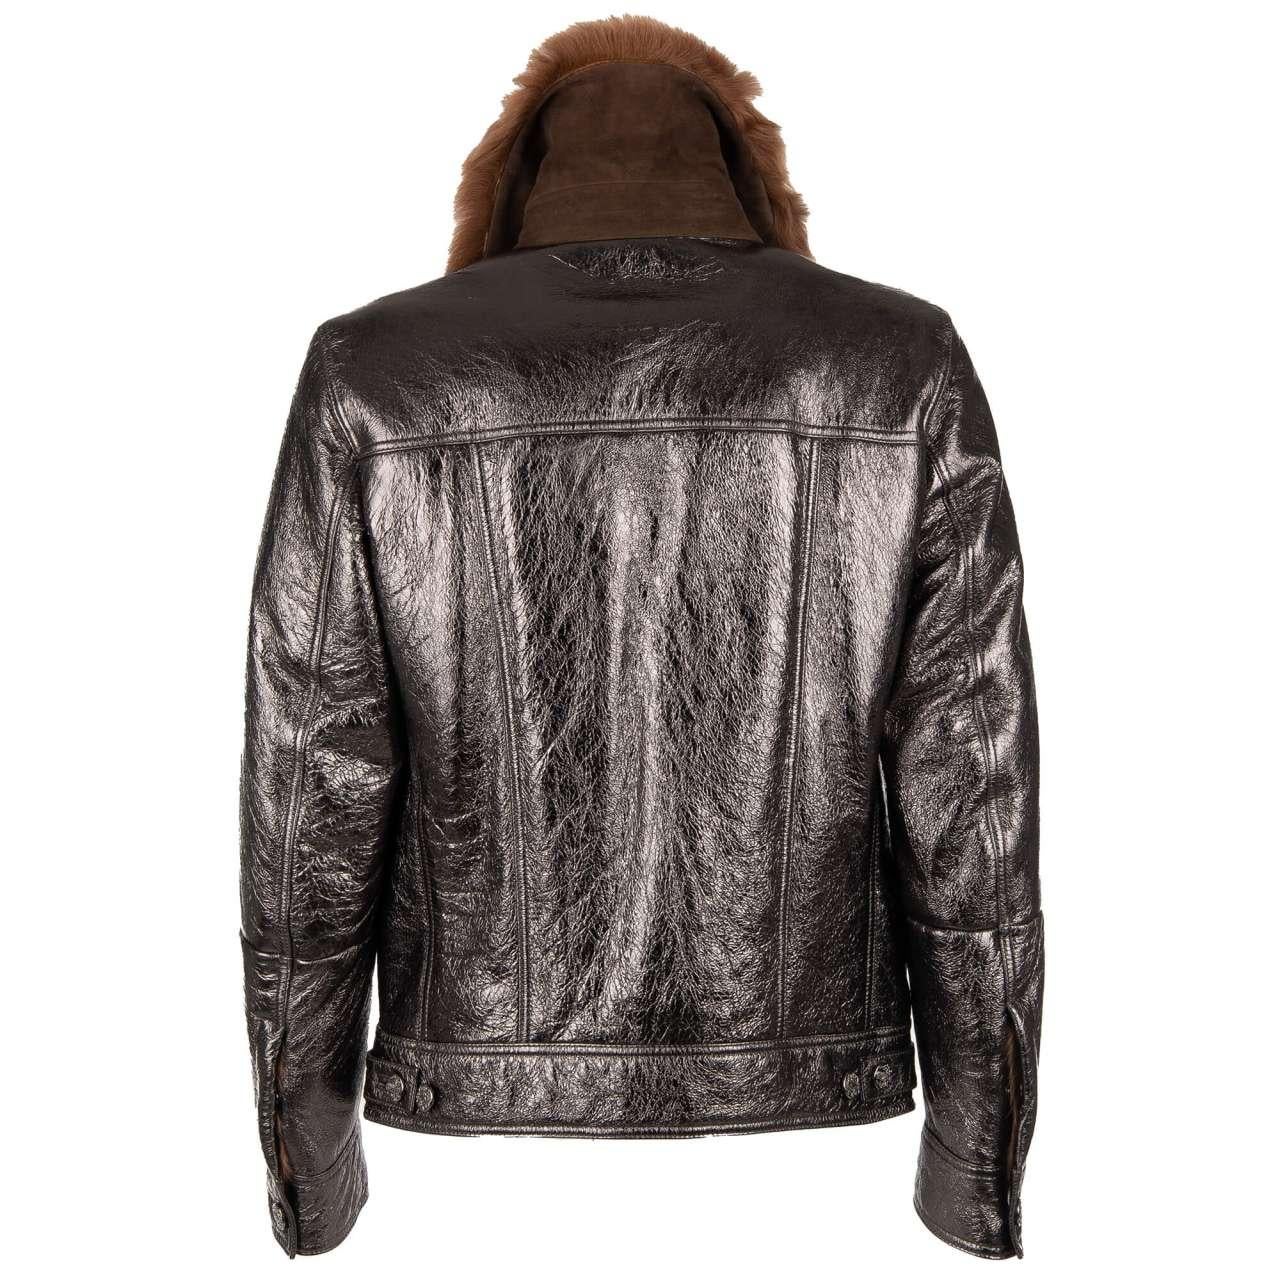 - Unique Metallic Nappa Leather Jacket with real fur lining, fur collar and front pockets by DOLCE & GABBANA - New with tag - Former RRP : EUR 4.950 - MADE IN ITALY - Slim Fit - Modèle : G9PR1L-FUPZK-S9000 - Matière : 100% Peau d'agneau - Doublure :